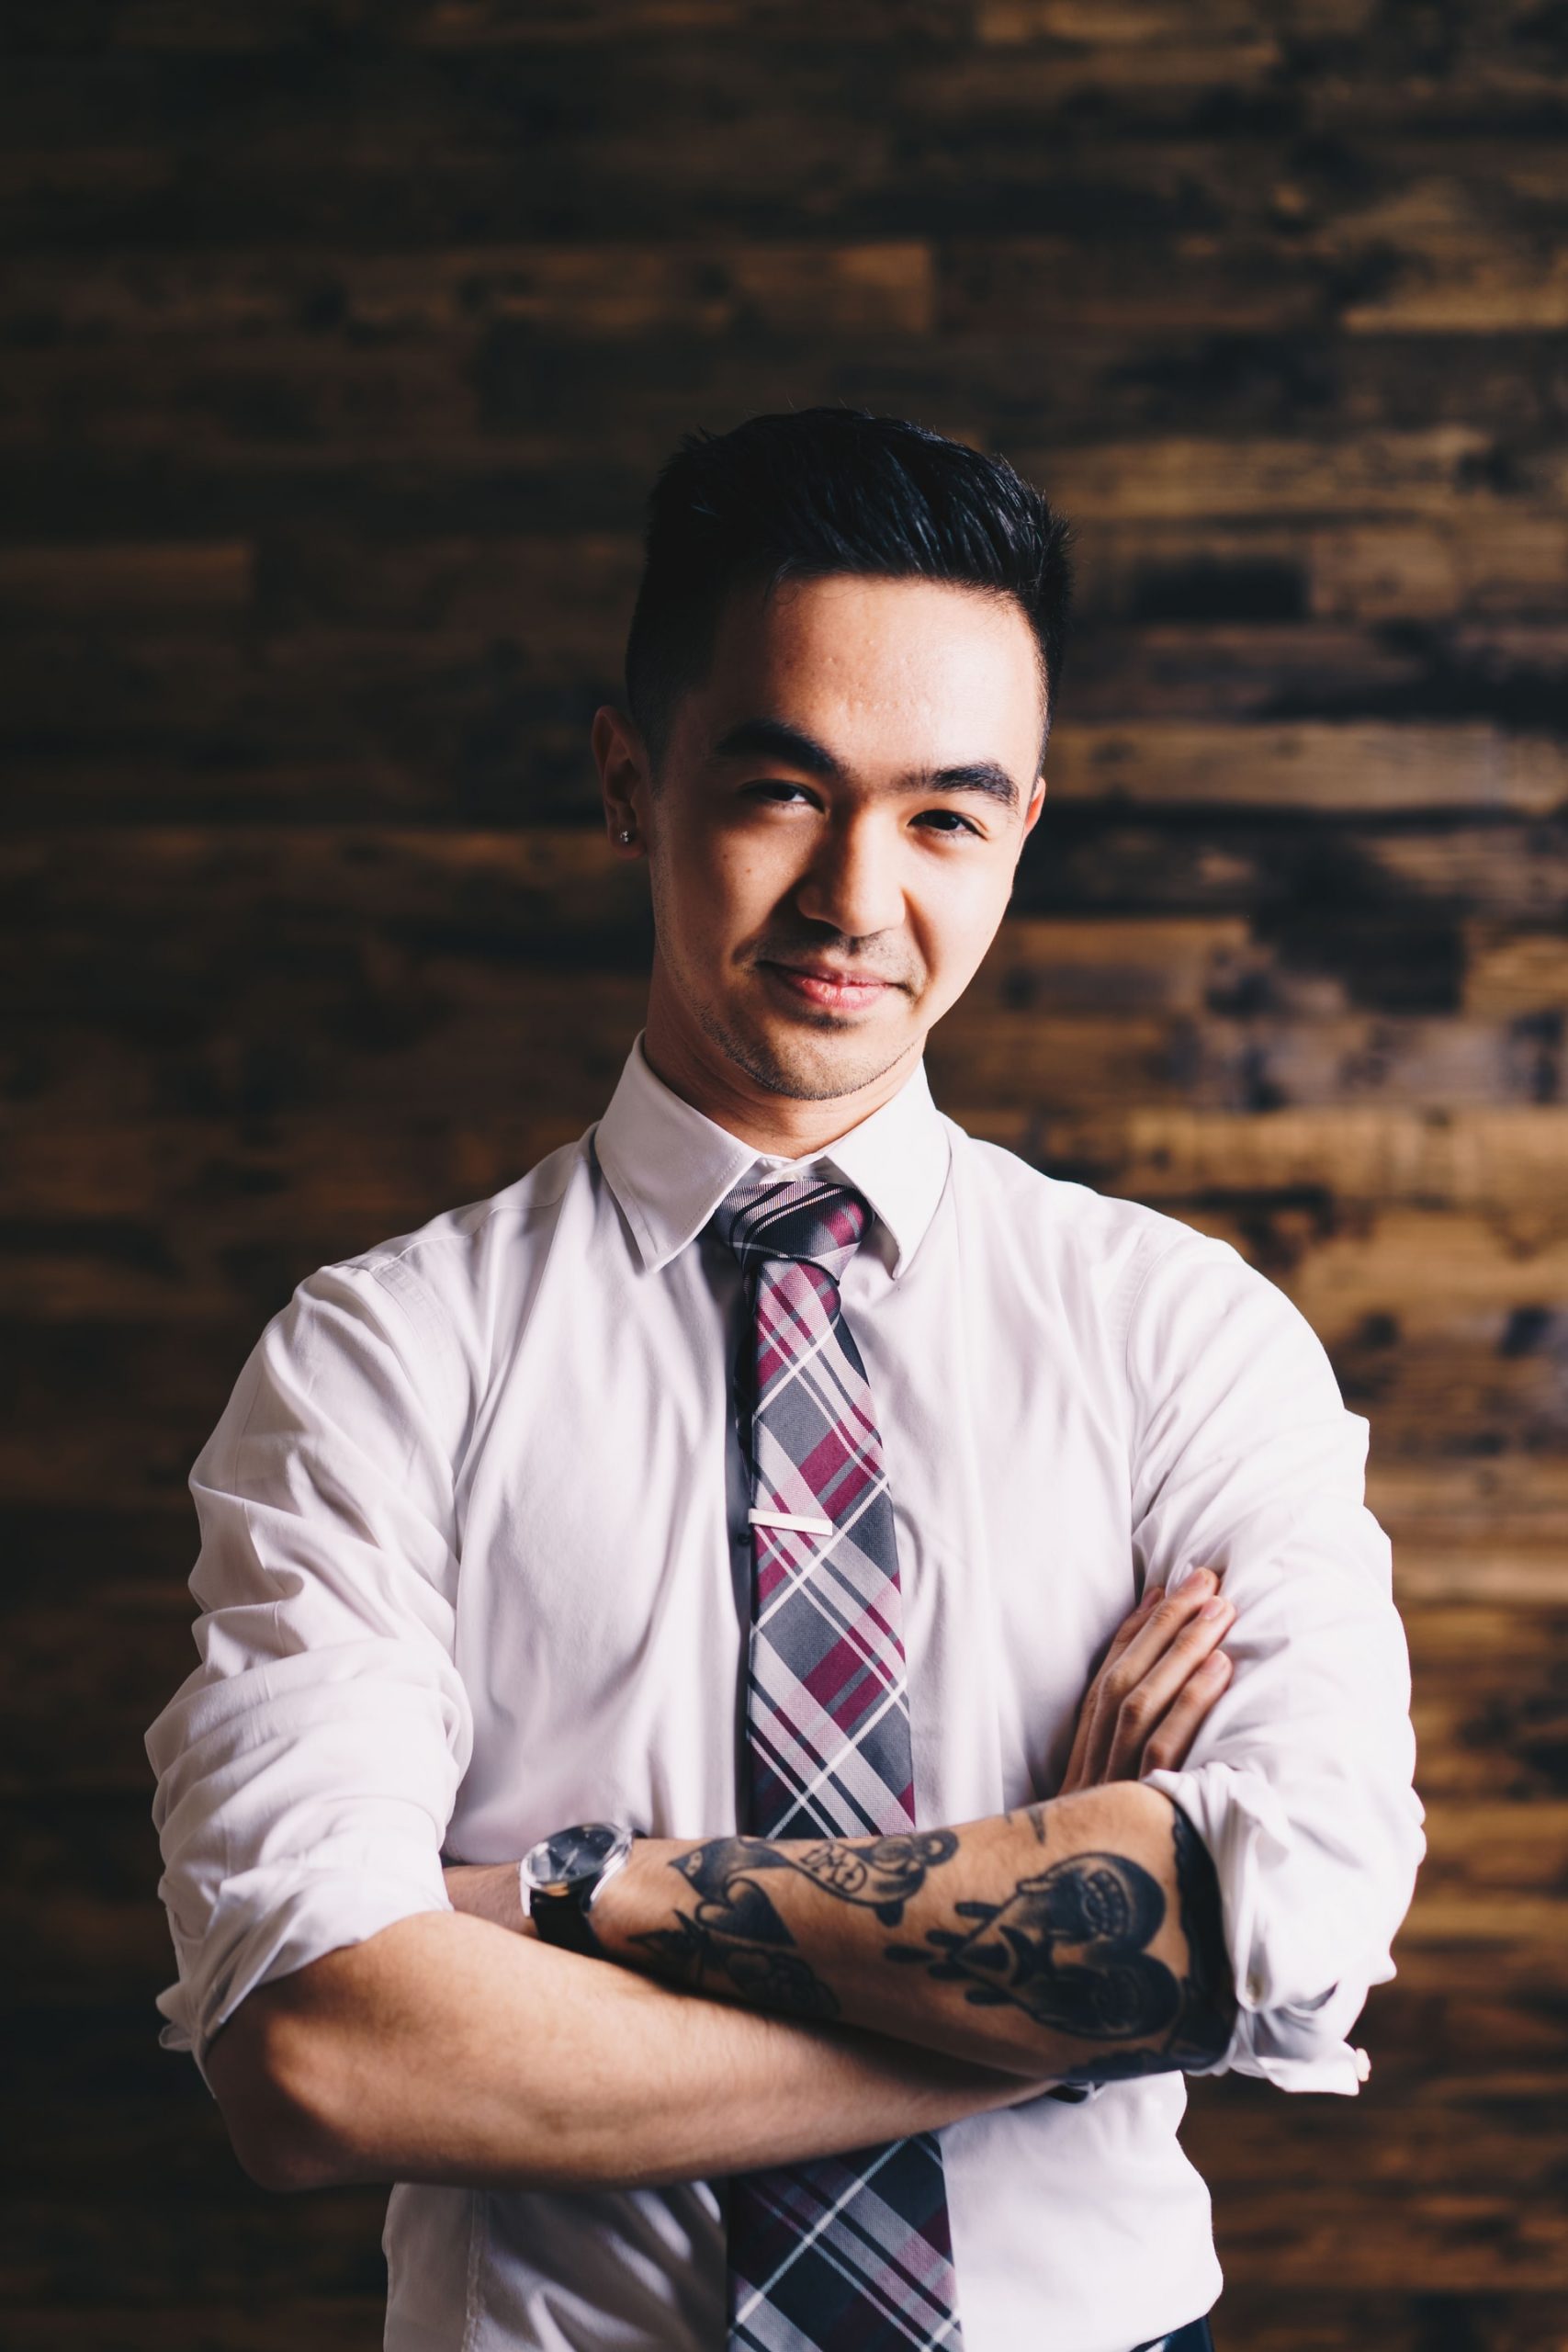 Image of a business person with tattoos and piercings